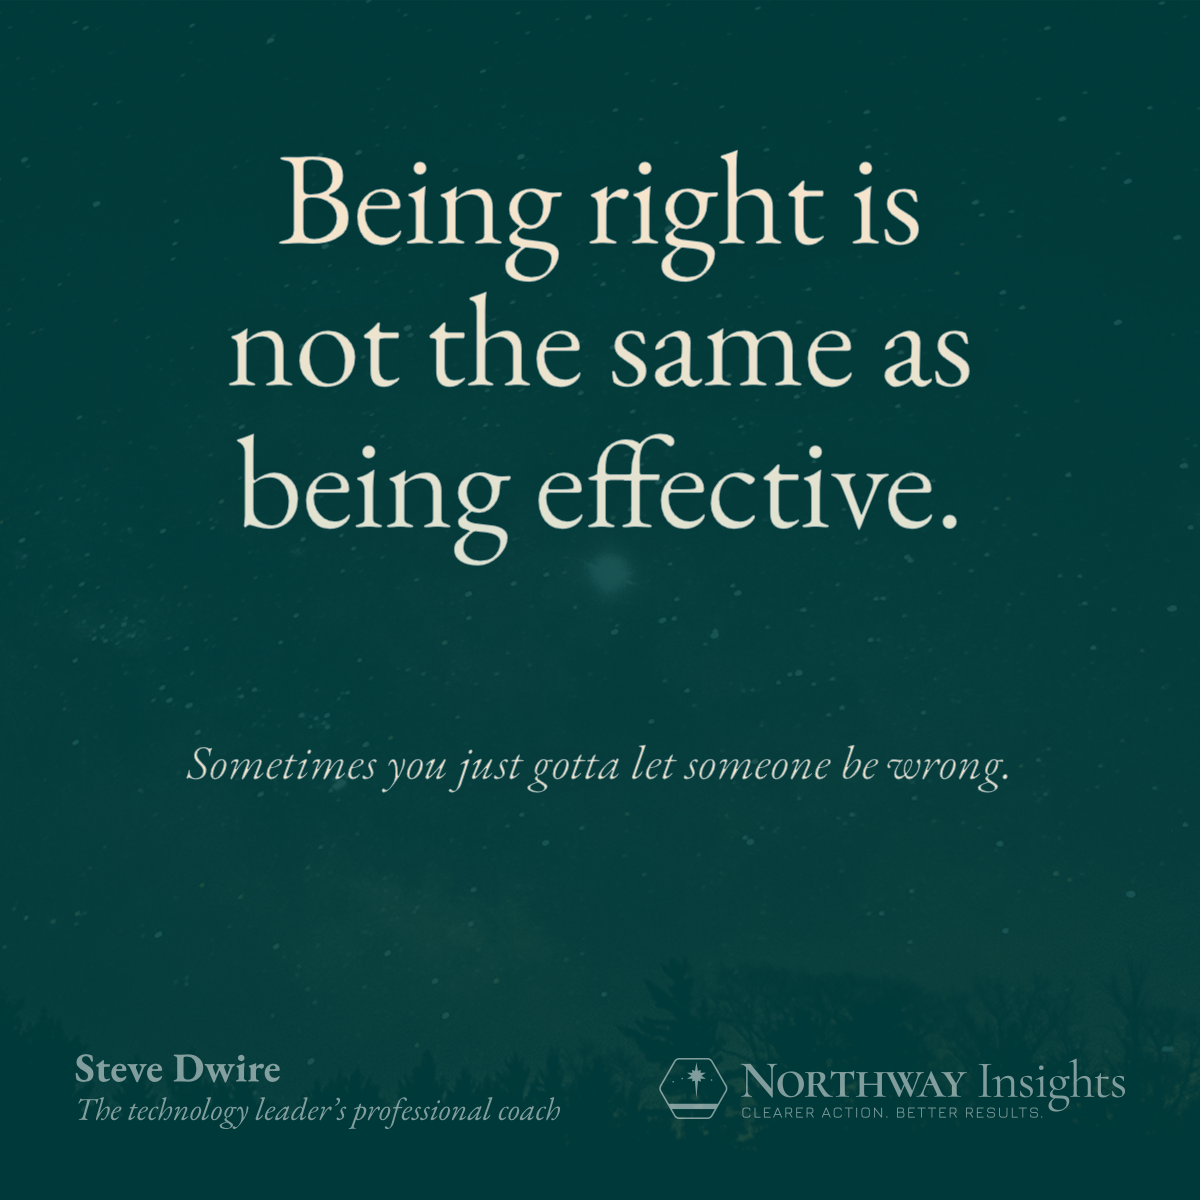 Being right is not the same as being effective.